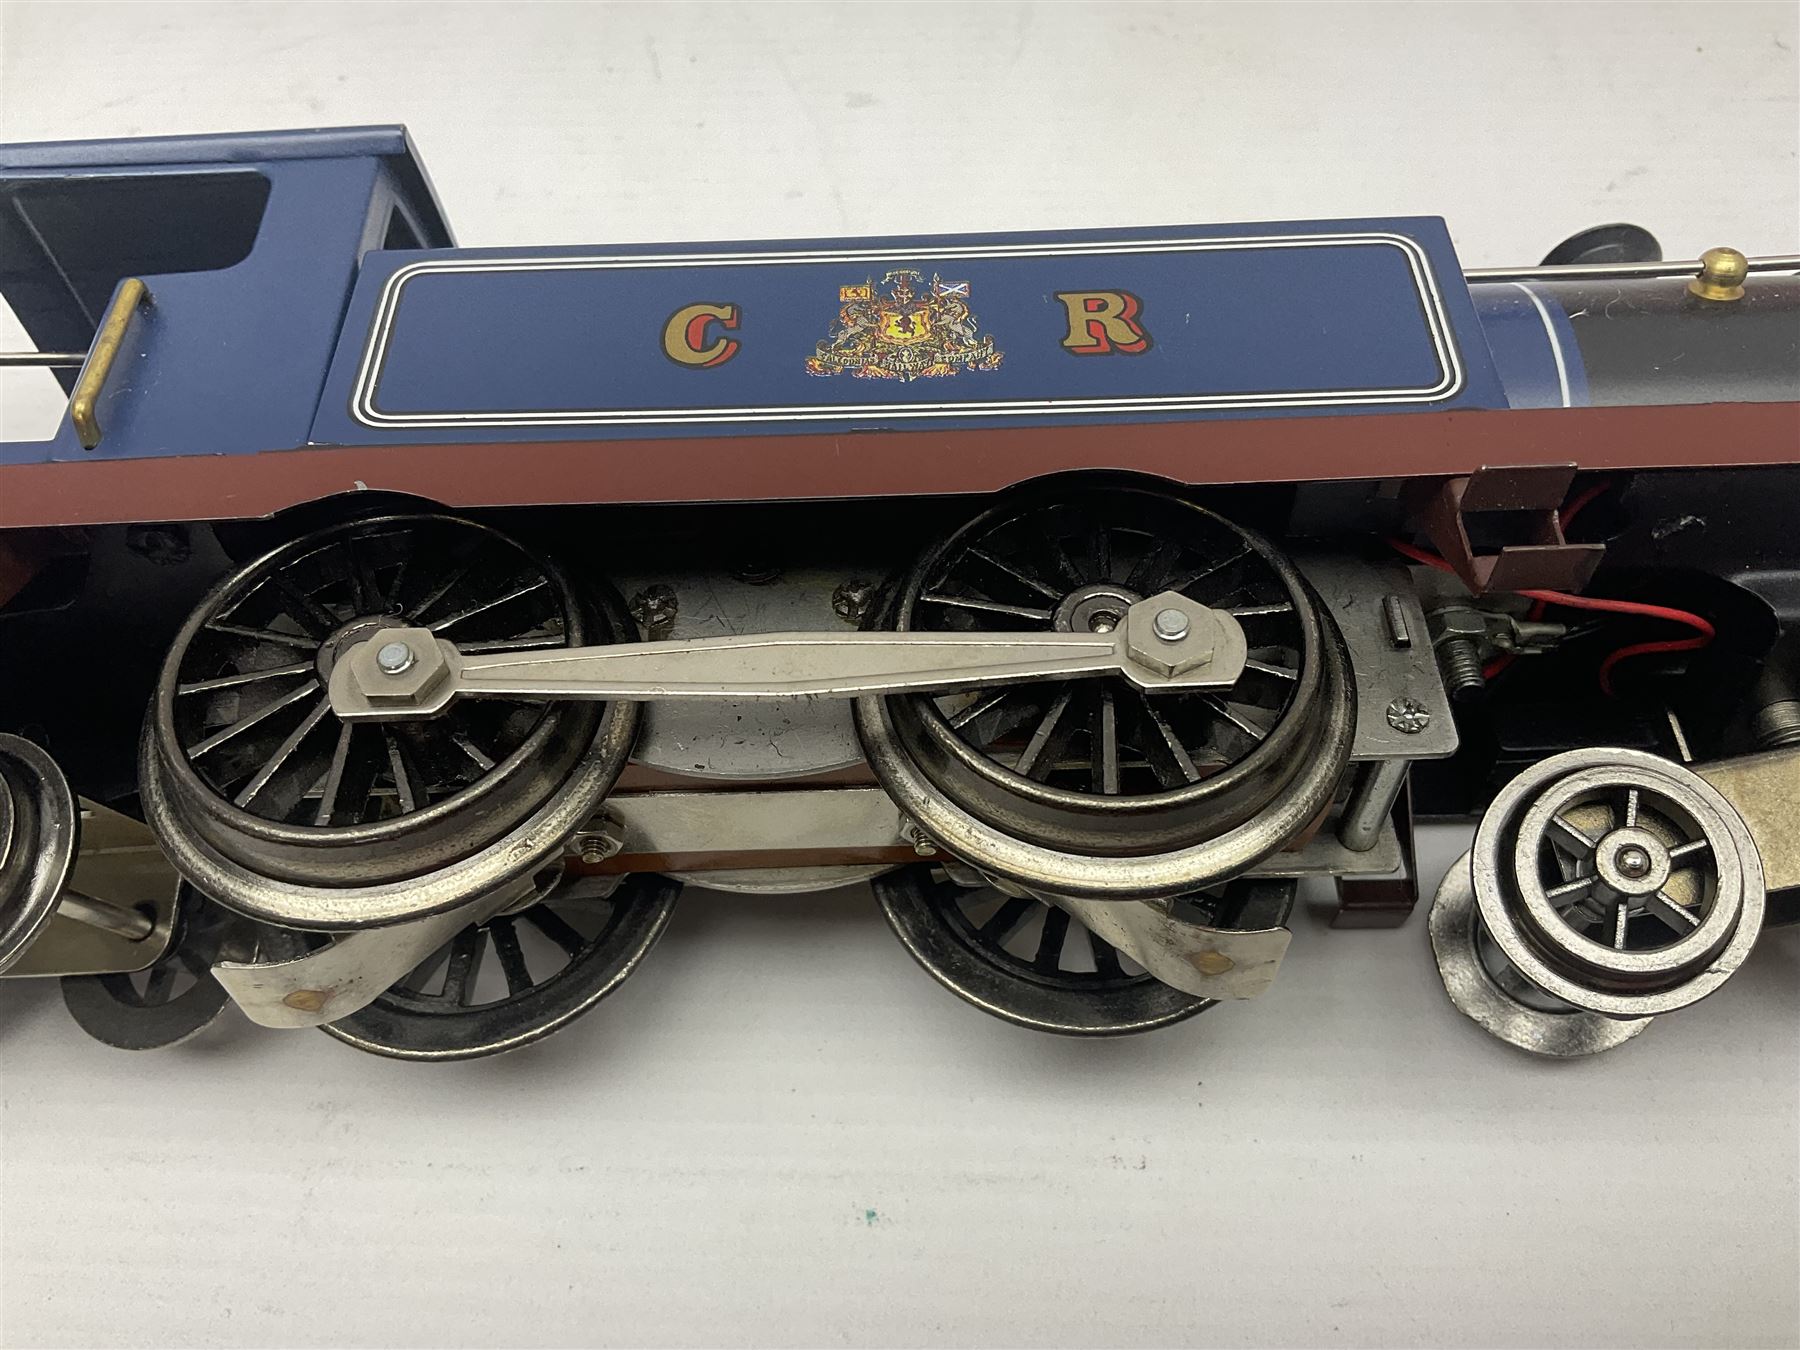 Ace Trains '0' gauge - C1/CR Caledonian Railway 4-4-4 tank locomotive; in plain brown box with Ace T - Image 10 of 16